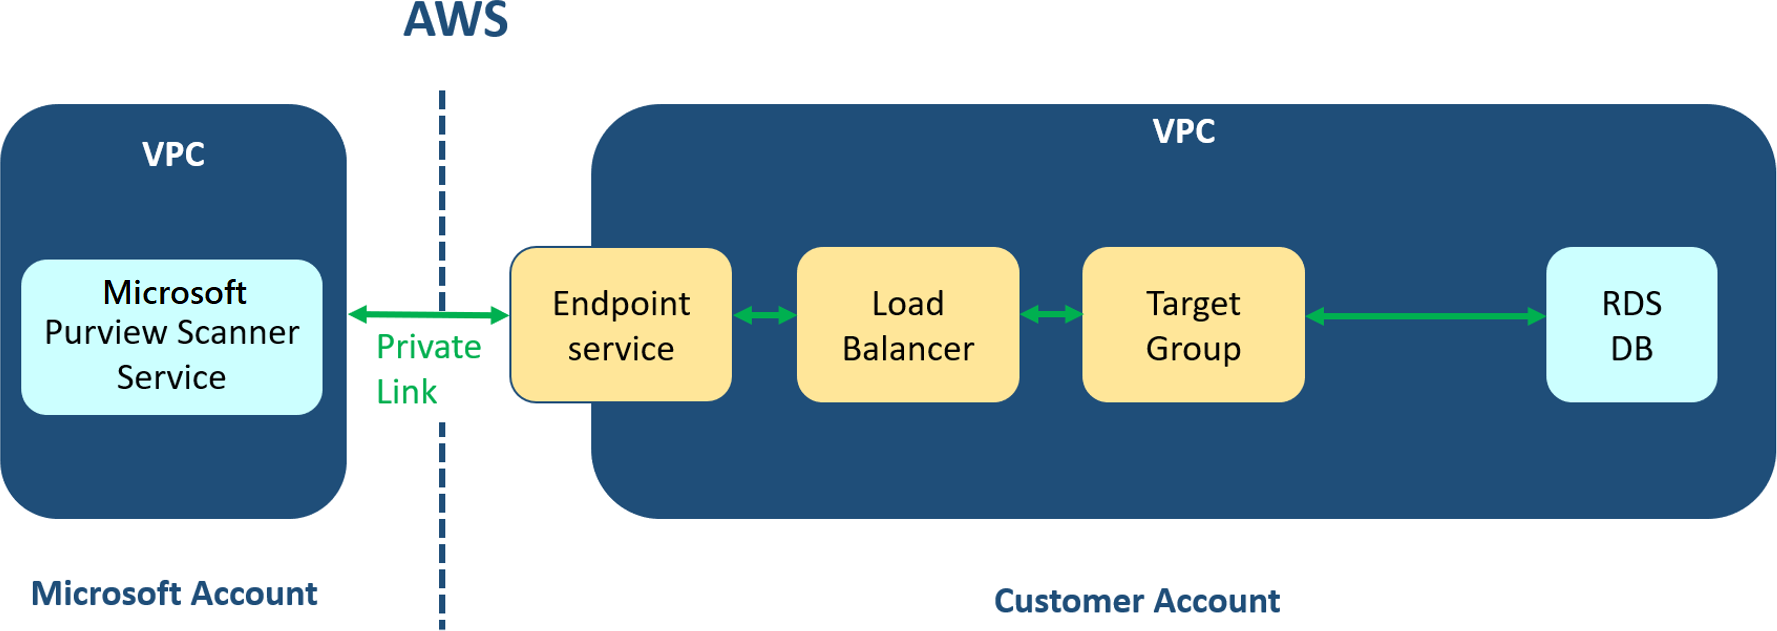 Diagram of the Multi-Cloud Scanning Connectors for Microsoft Purview service in a VPC architecture.